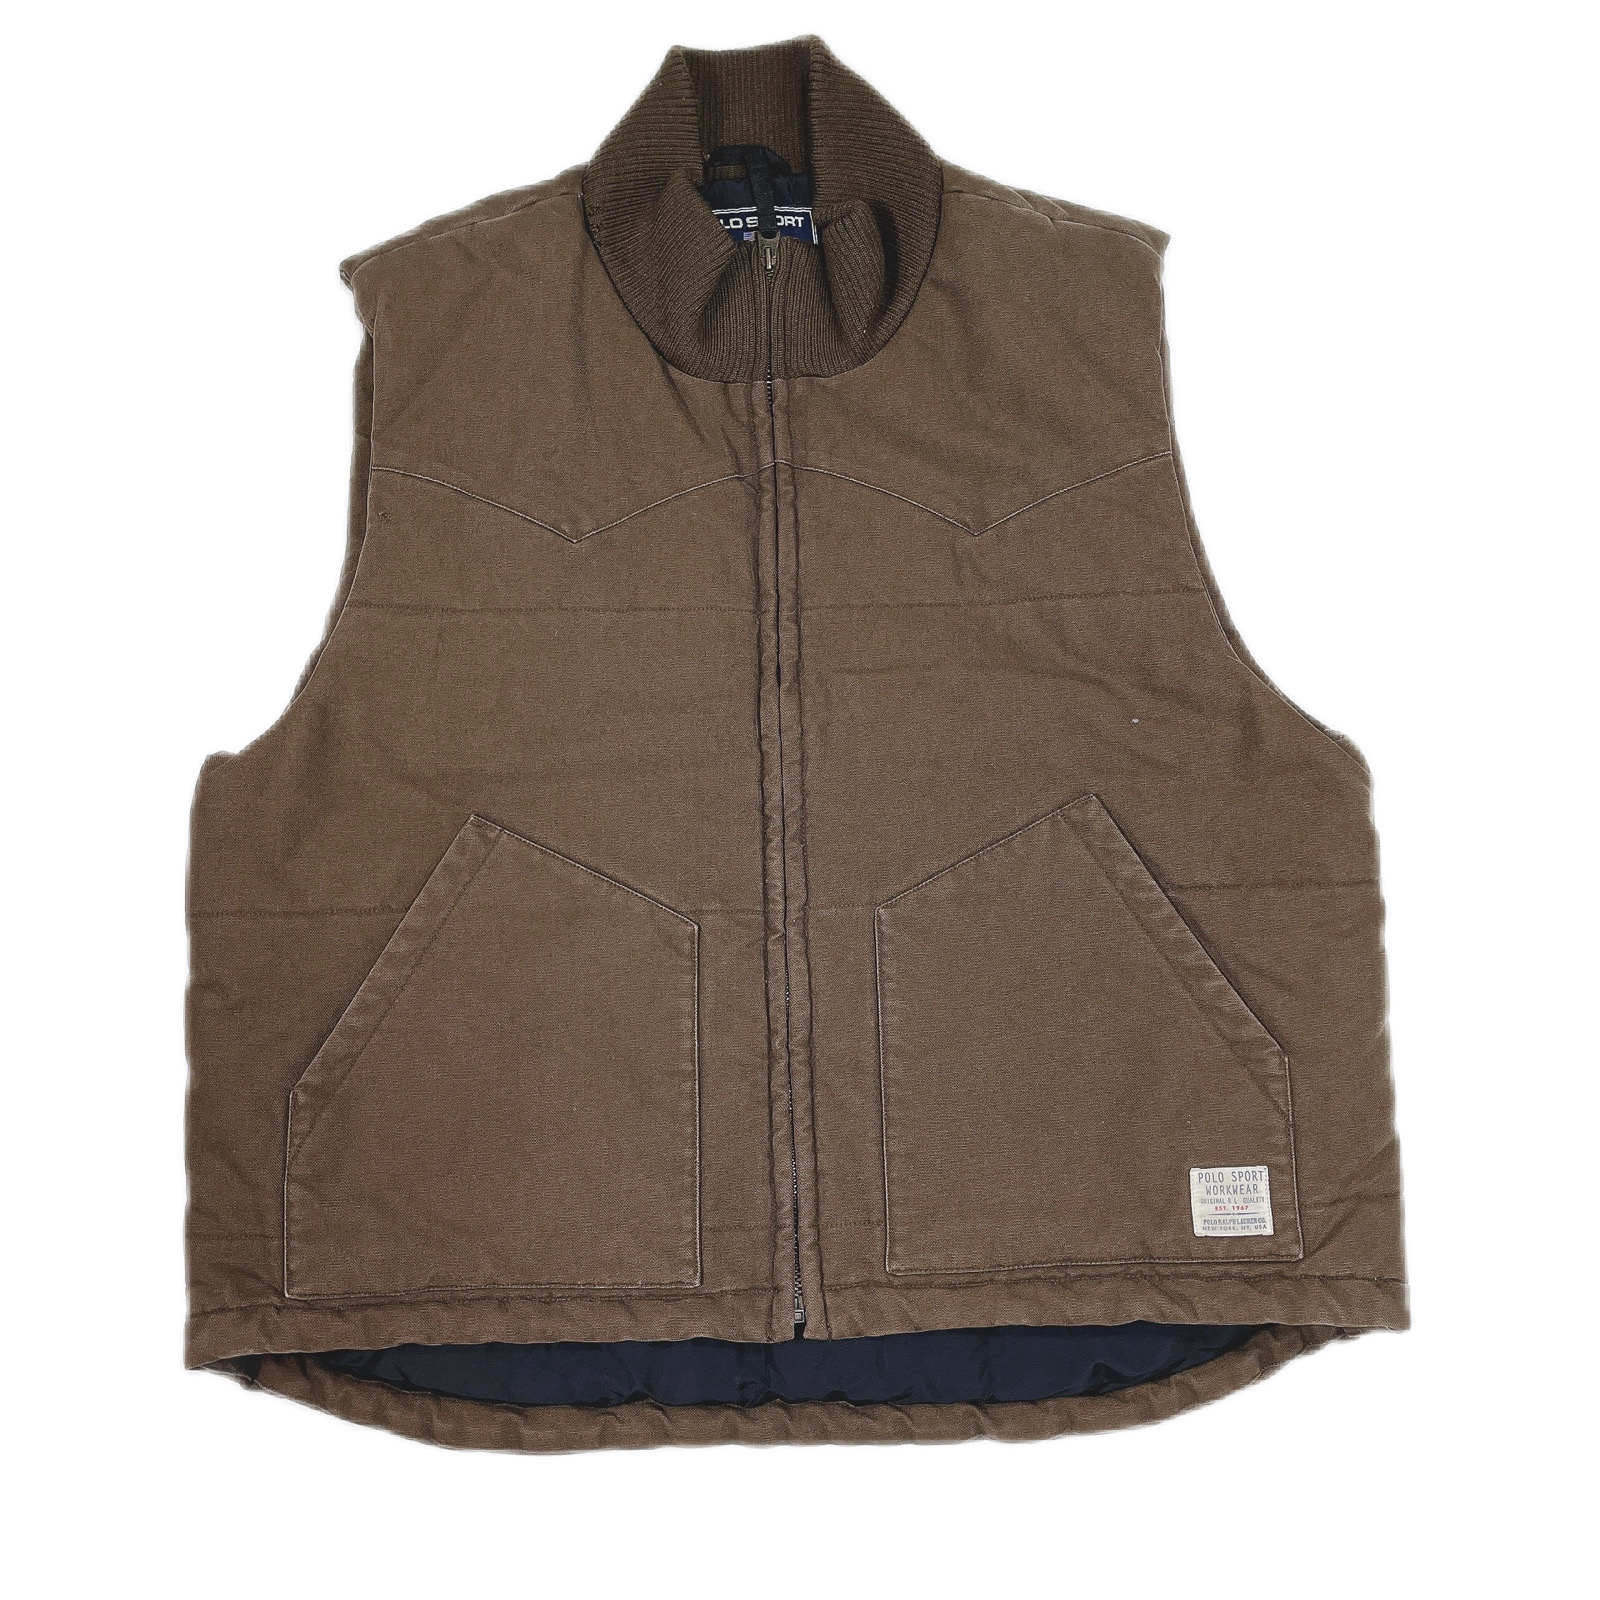 Lsize Polo sports vest brown